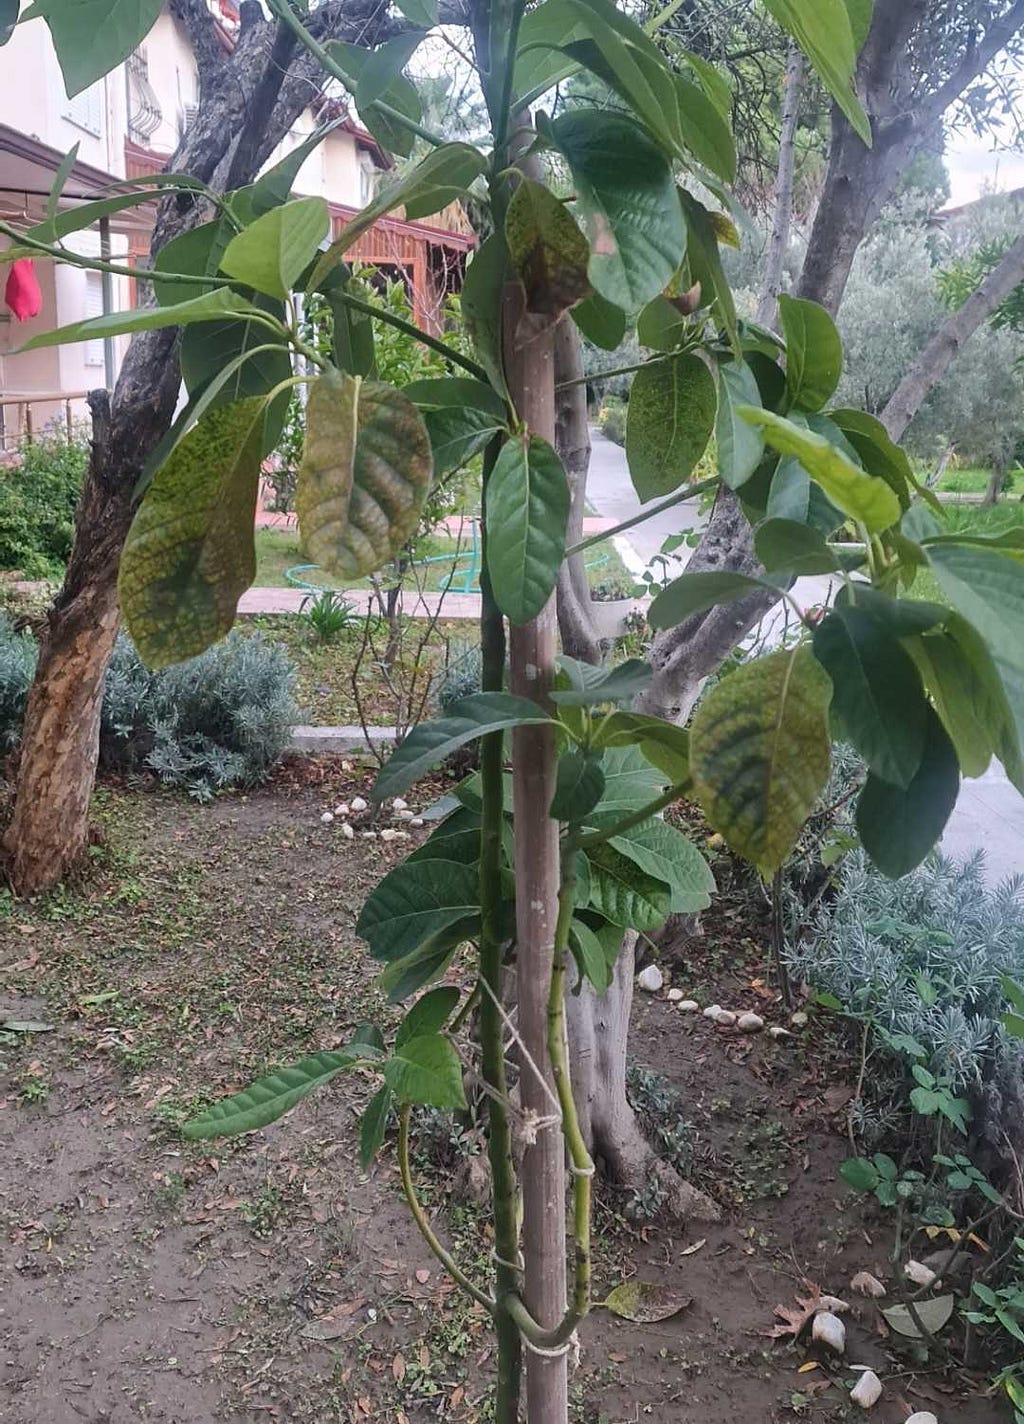 An avacado tree from our garden. Photo taken by me